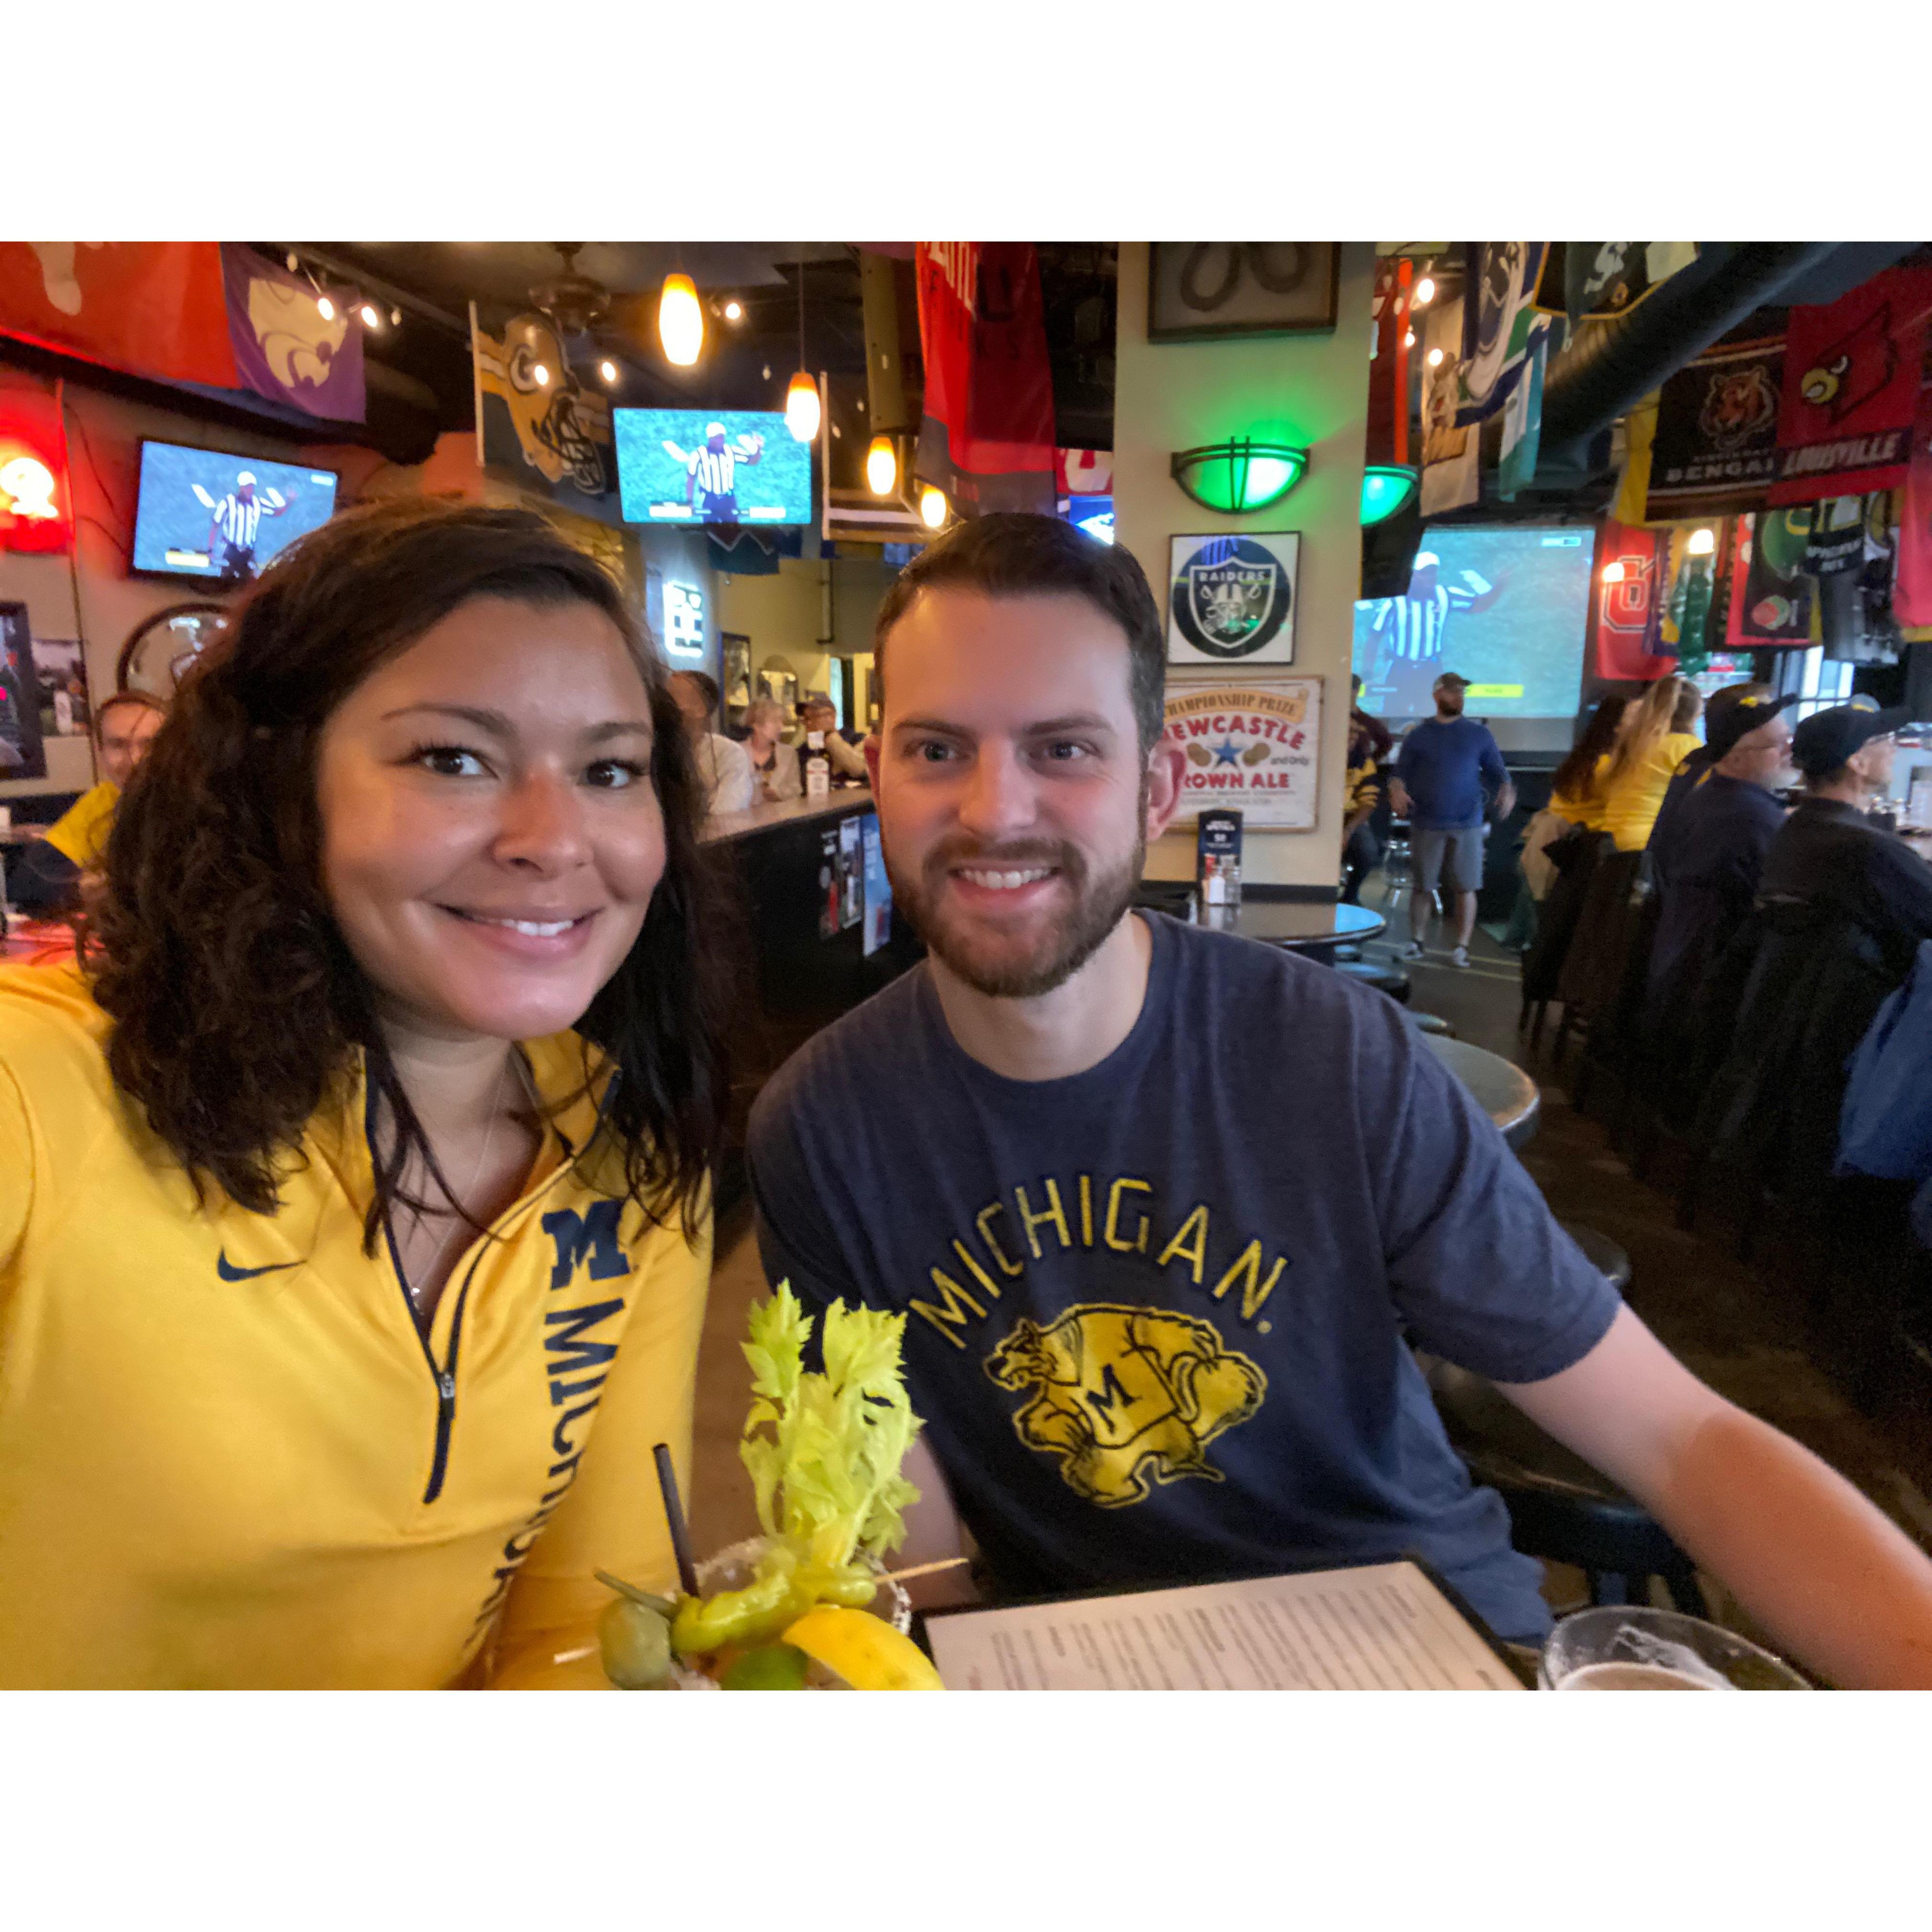 Brett is a Coug but we loved going to Buckley's in Belltown which is the Michigan alum bar to watch the UM games